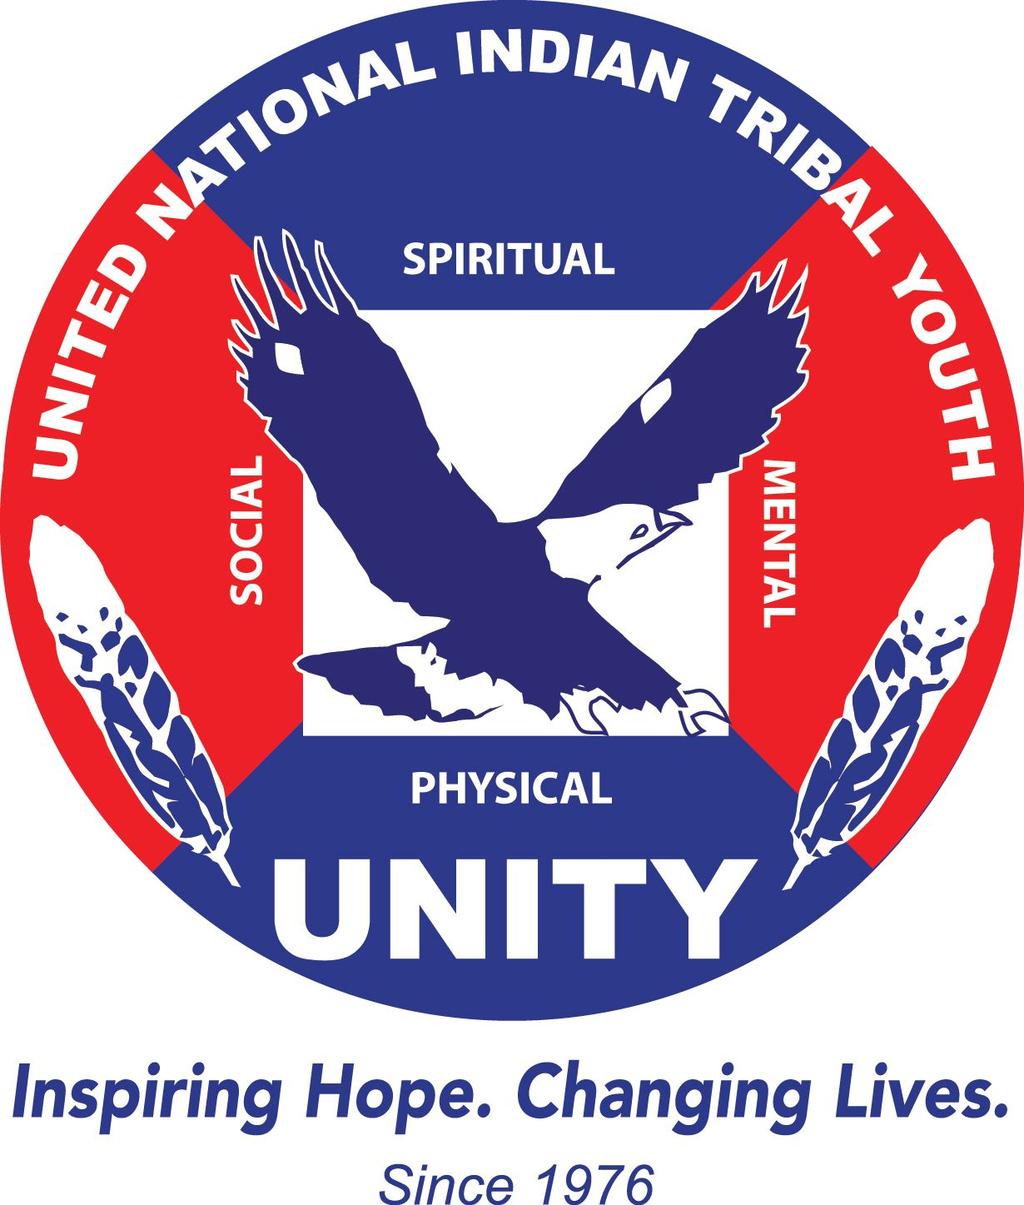 DRAFT AGENDA WELCOME TO THE 2018 NATIONAL UNITY CONFERENCE! Answering the call of our ancestors! LIKE & Follow United National Indian Tribal Youth s Facebook & Instagram Page for Conference Updates!